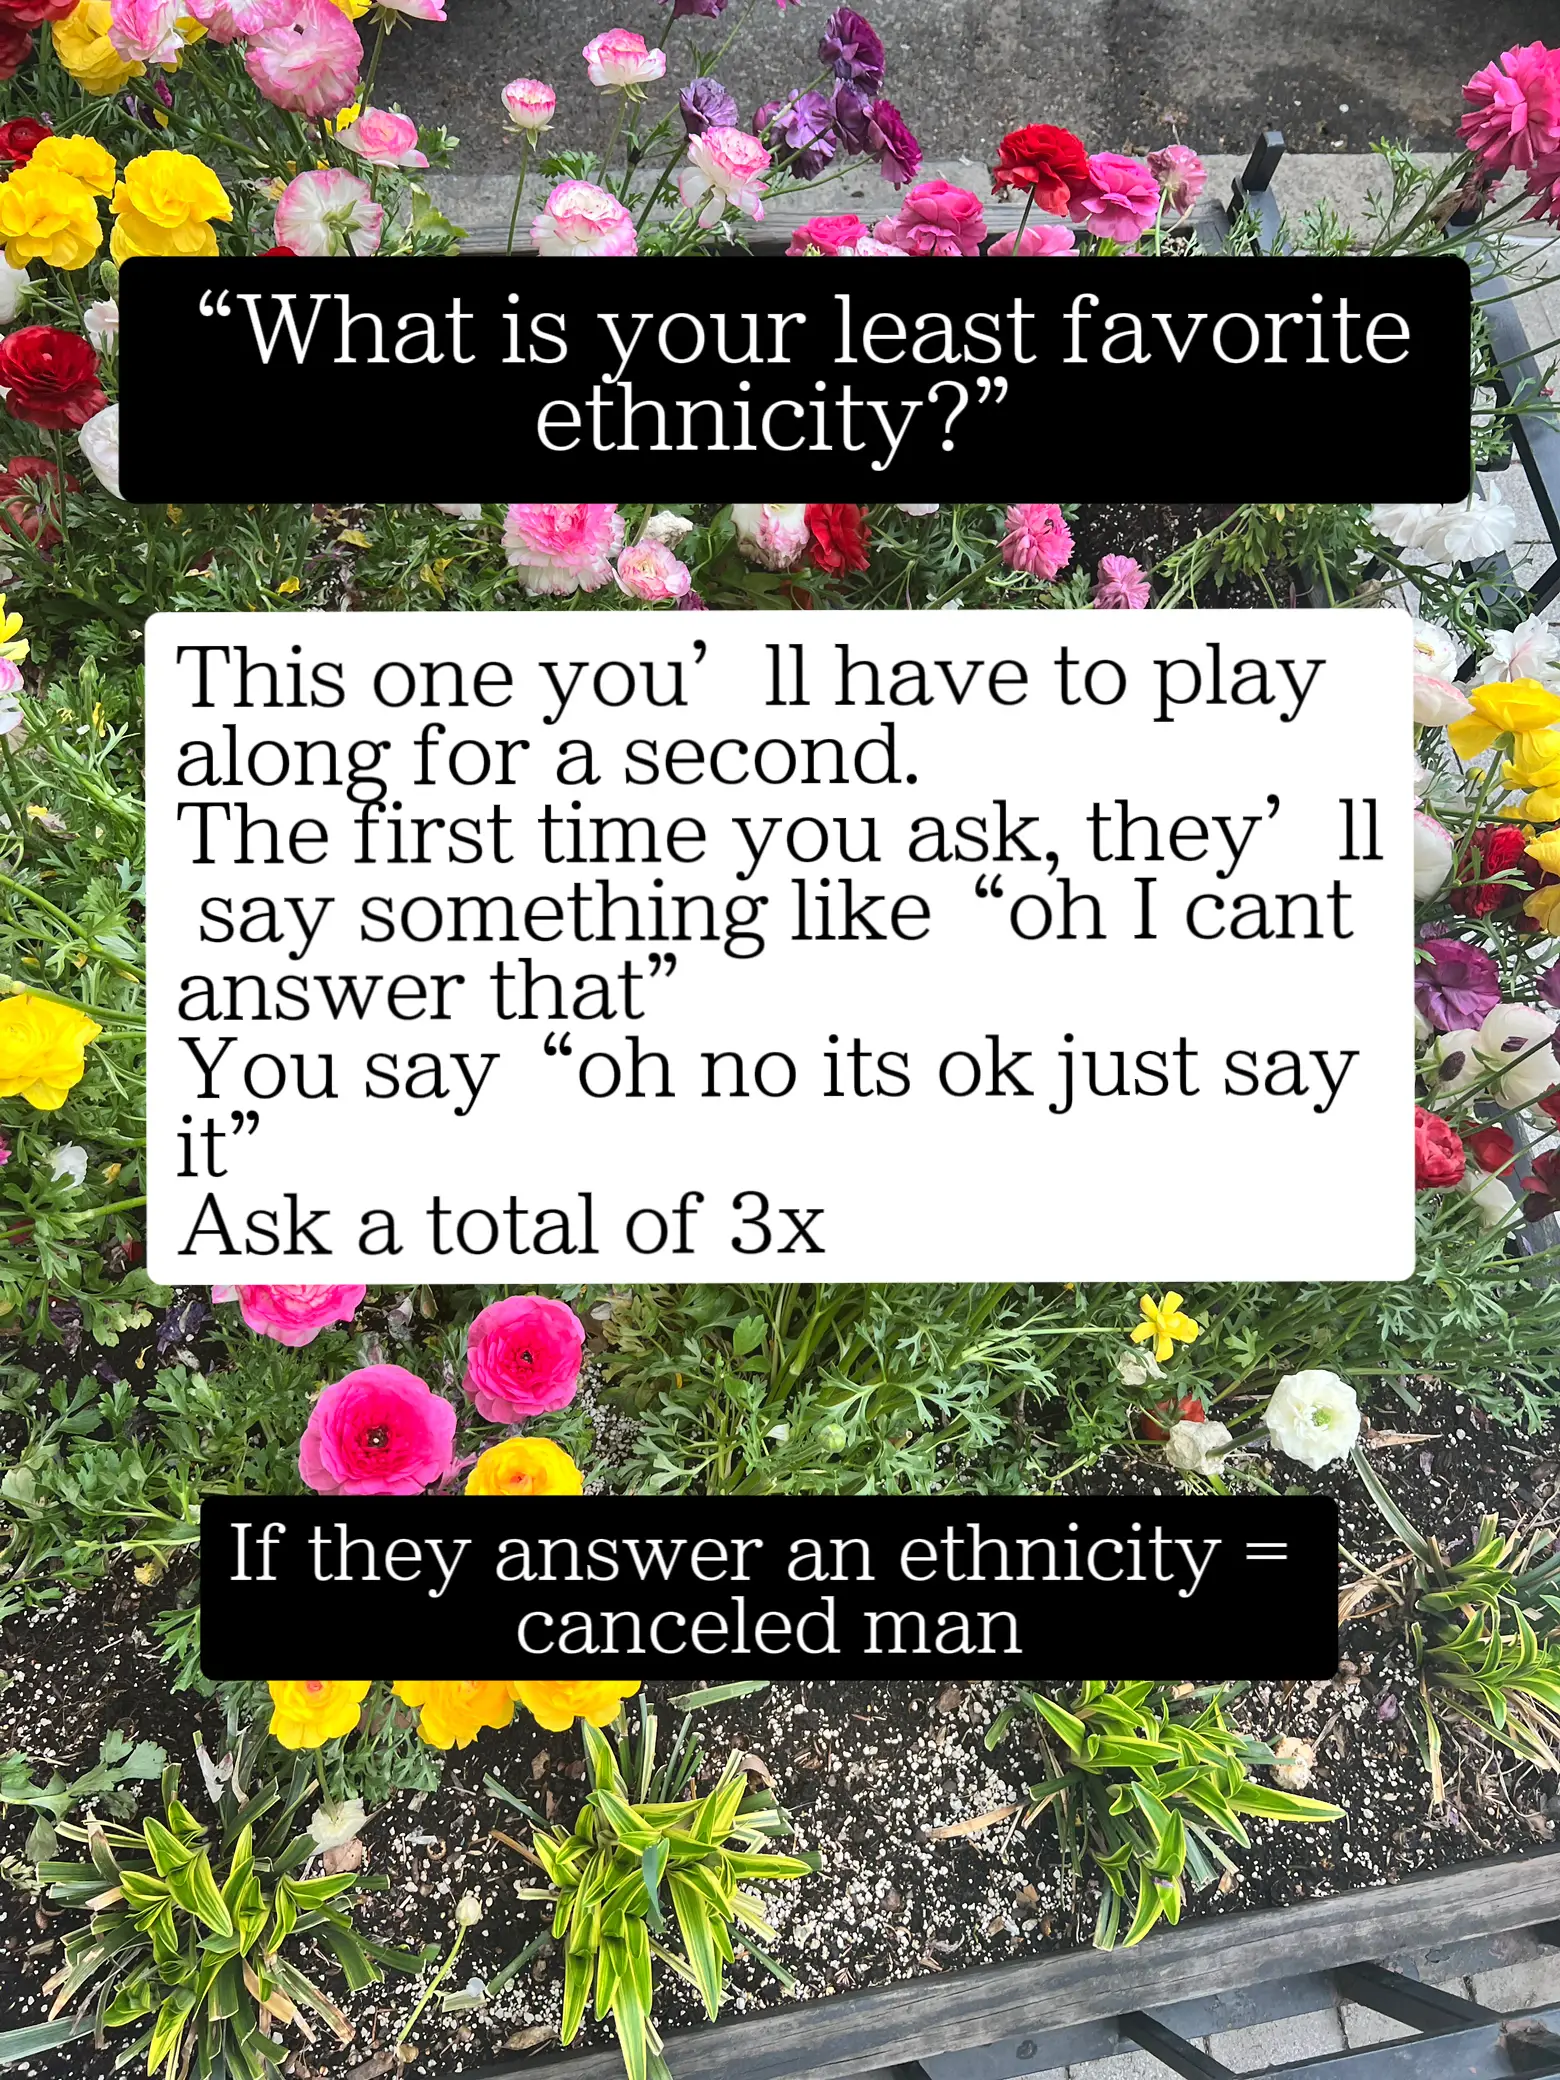  A text that says "What is your least favorite ethnicity?"